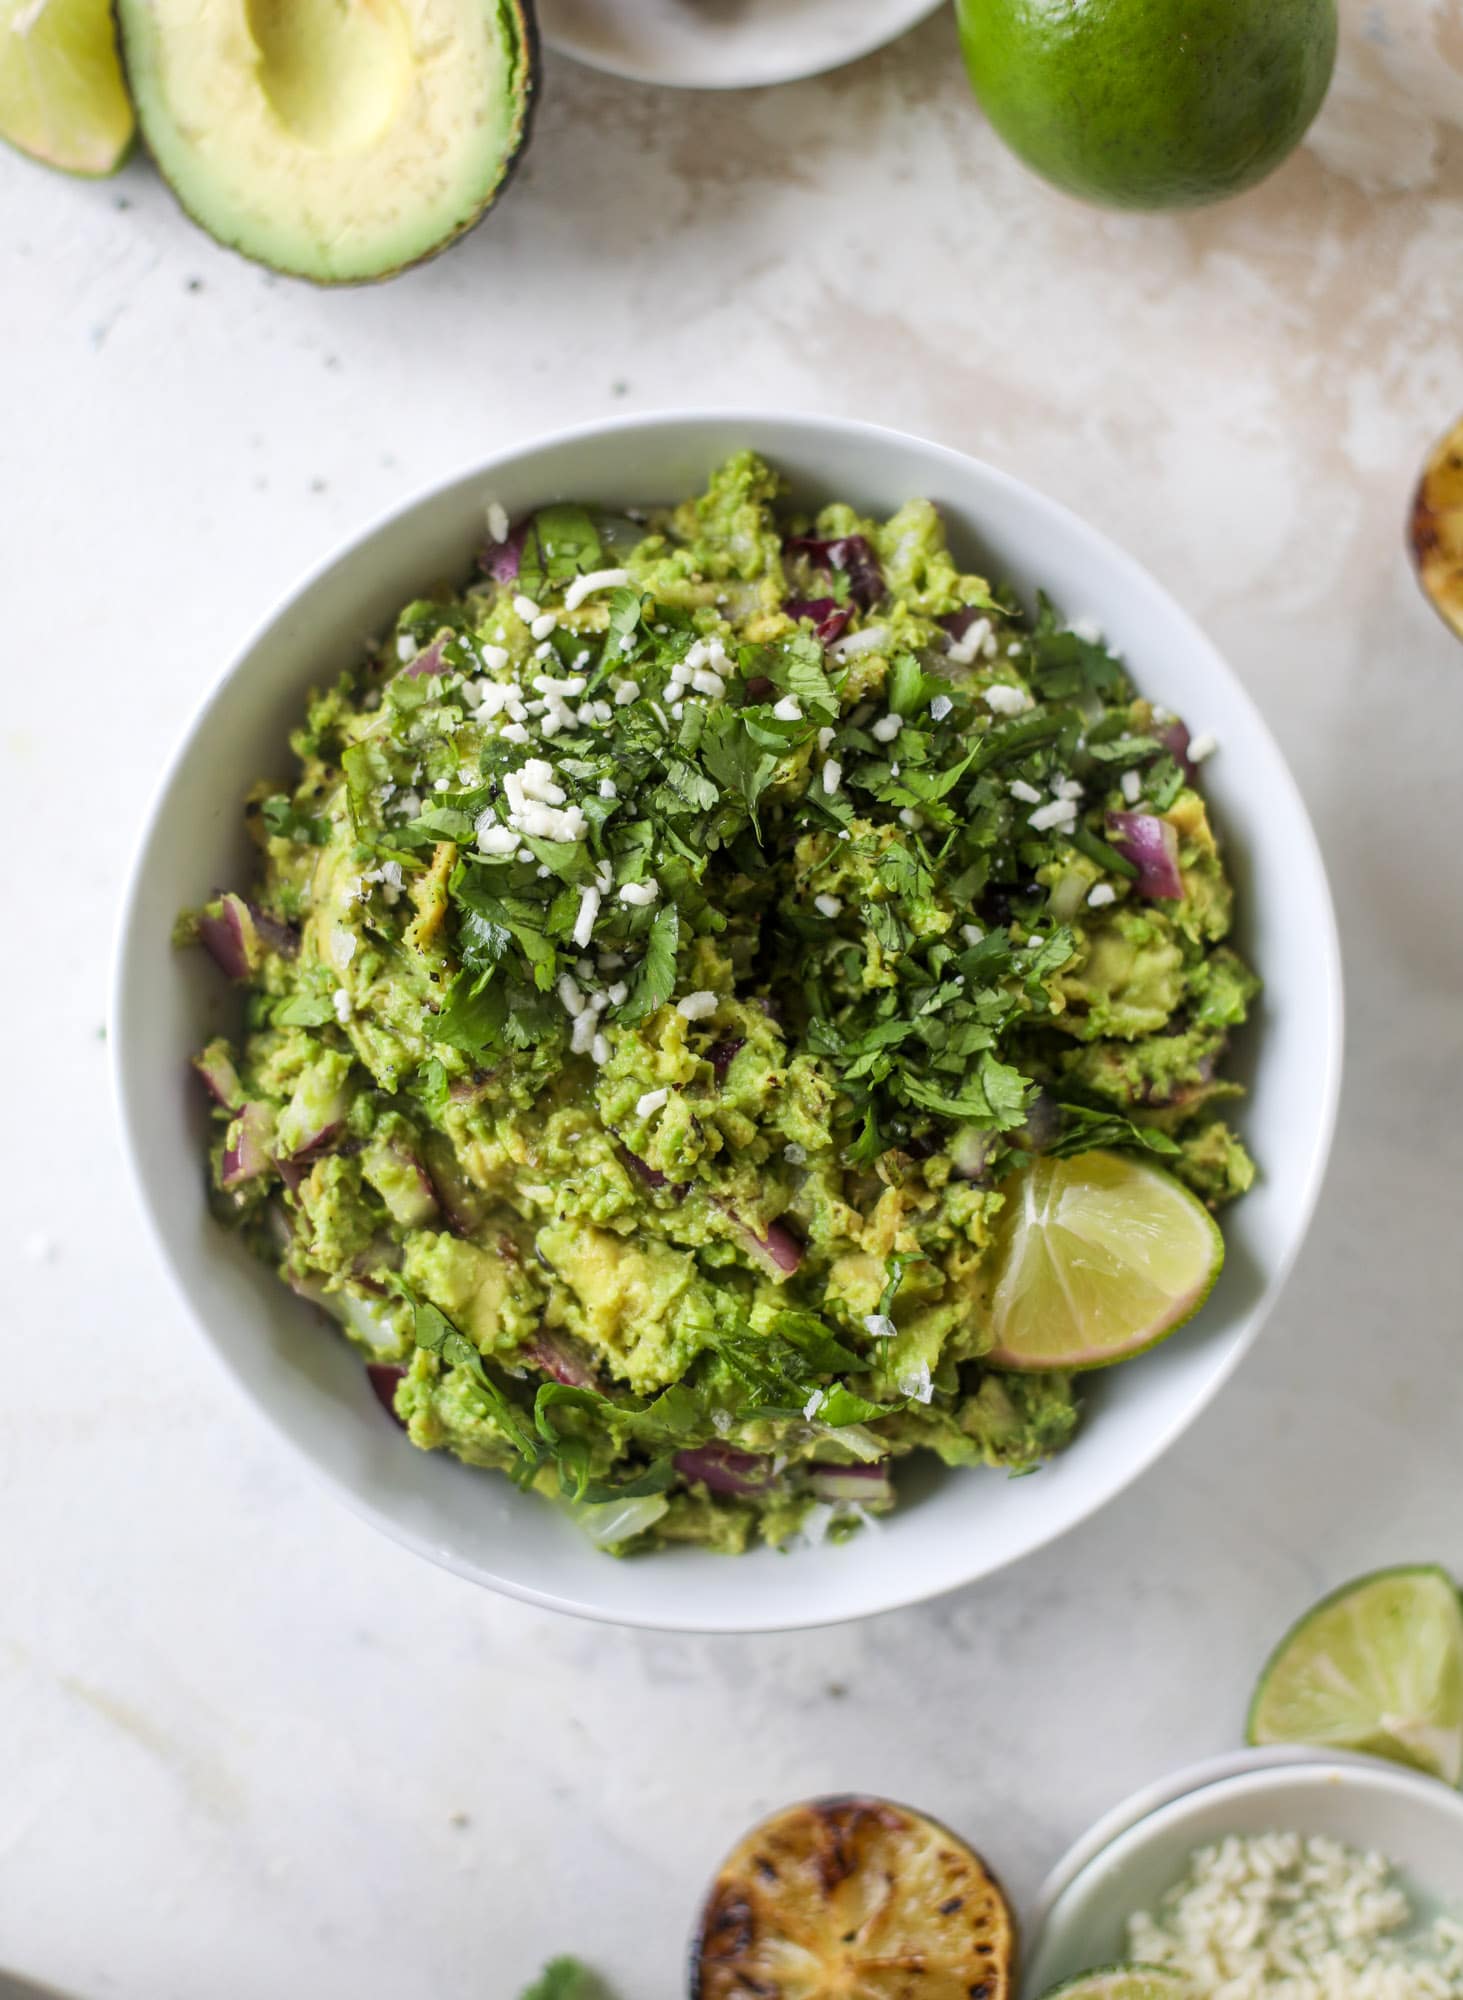 Take your guac up a notch by grilling the ingredients! This grilled guacamole is smoky and flavorful and just begging for all the chips.